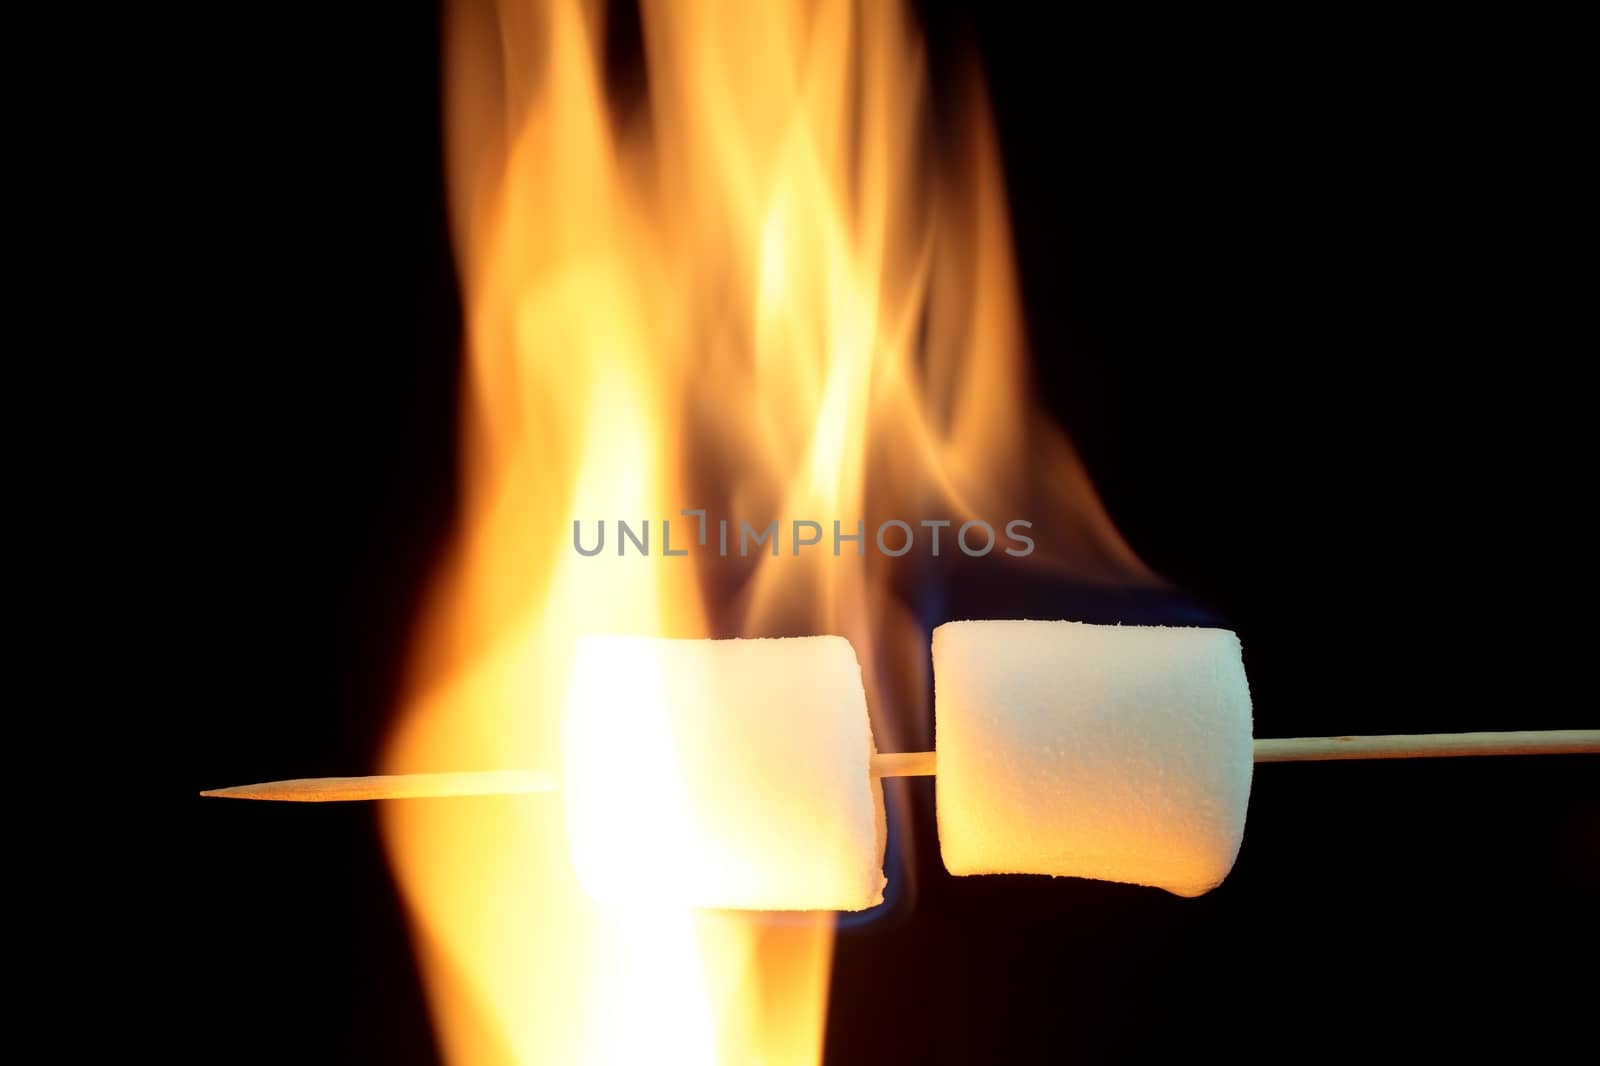 Marshmallow on a wood stick in fire.